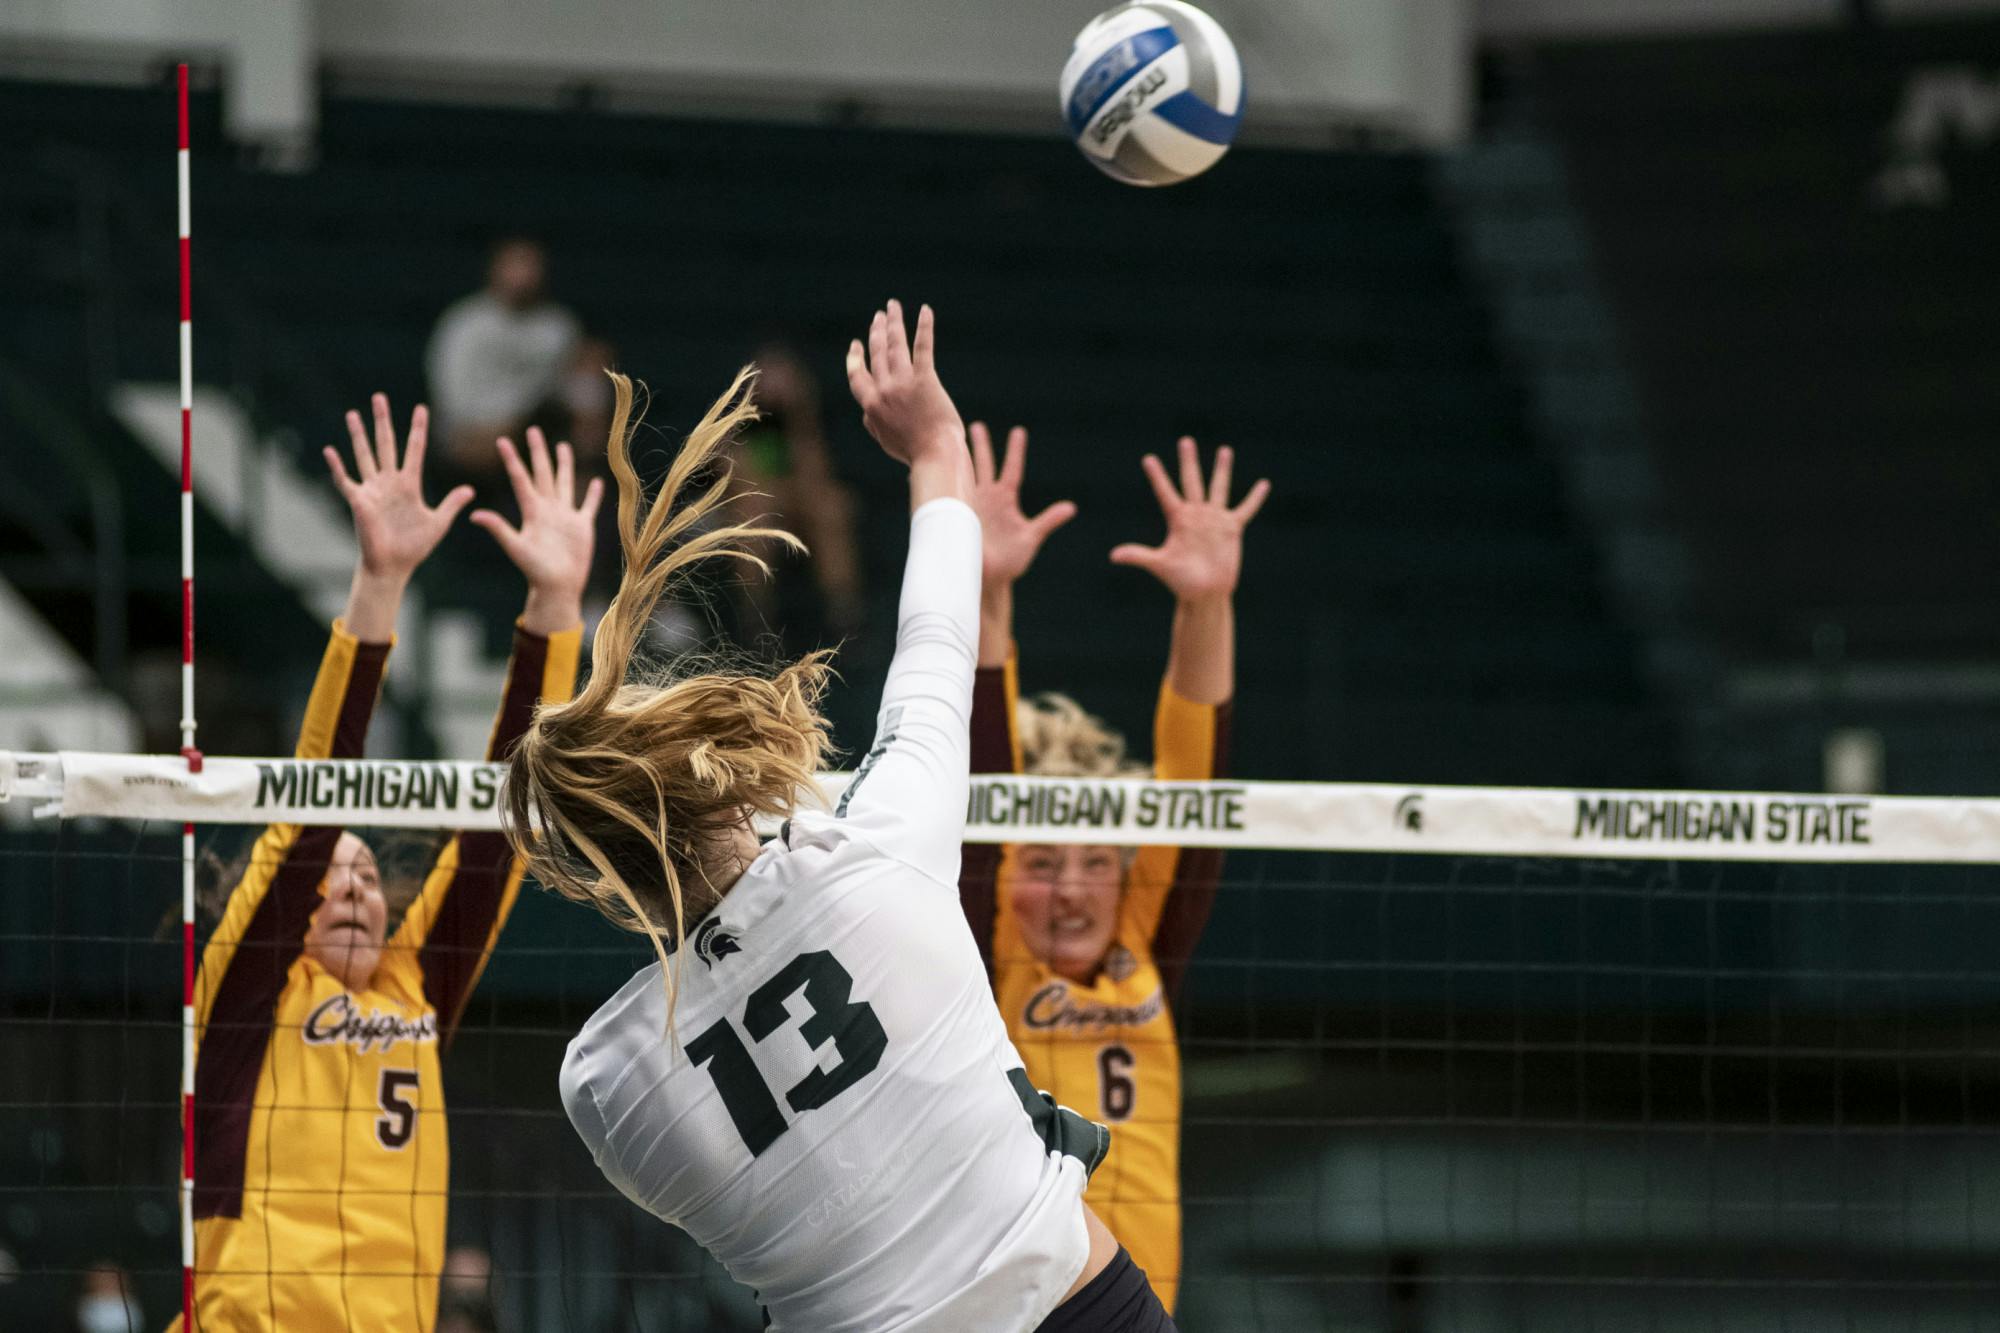 <p>Redshirt freshman Sarah Franklin (13) spikes the ball over the net during the game against Central Michigan University at the Jenison Fieldhouse on Sept. 17, 2021. The Spartans won against the Chippewas 3-1.</p>